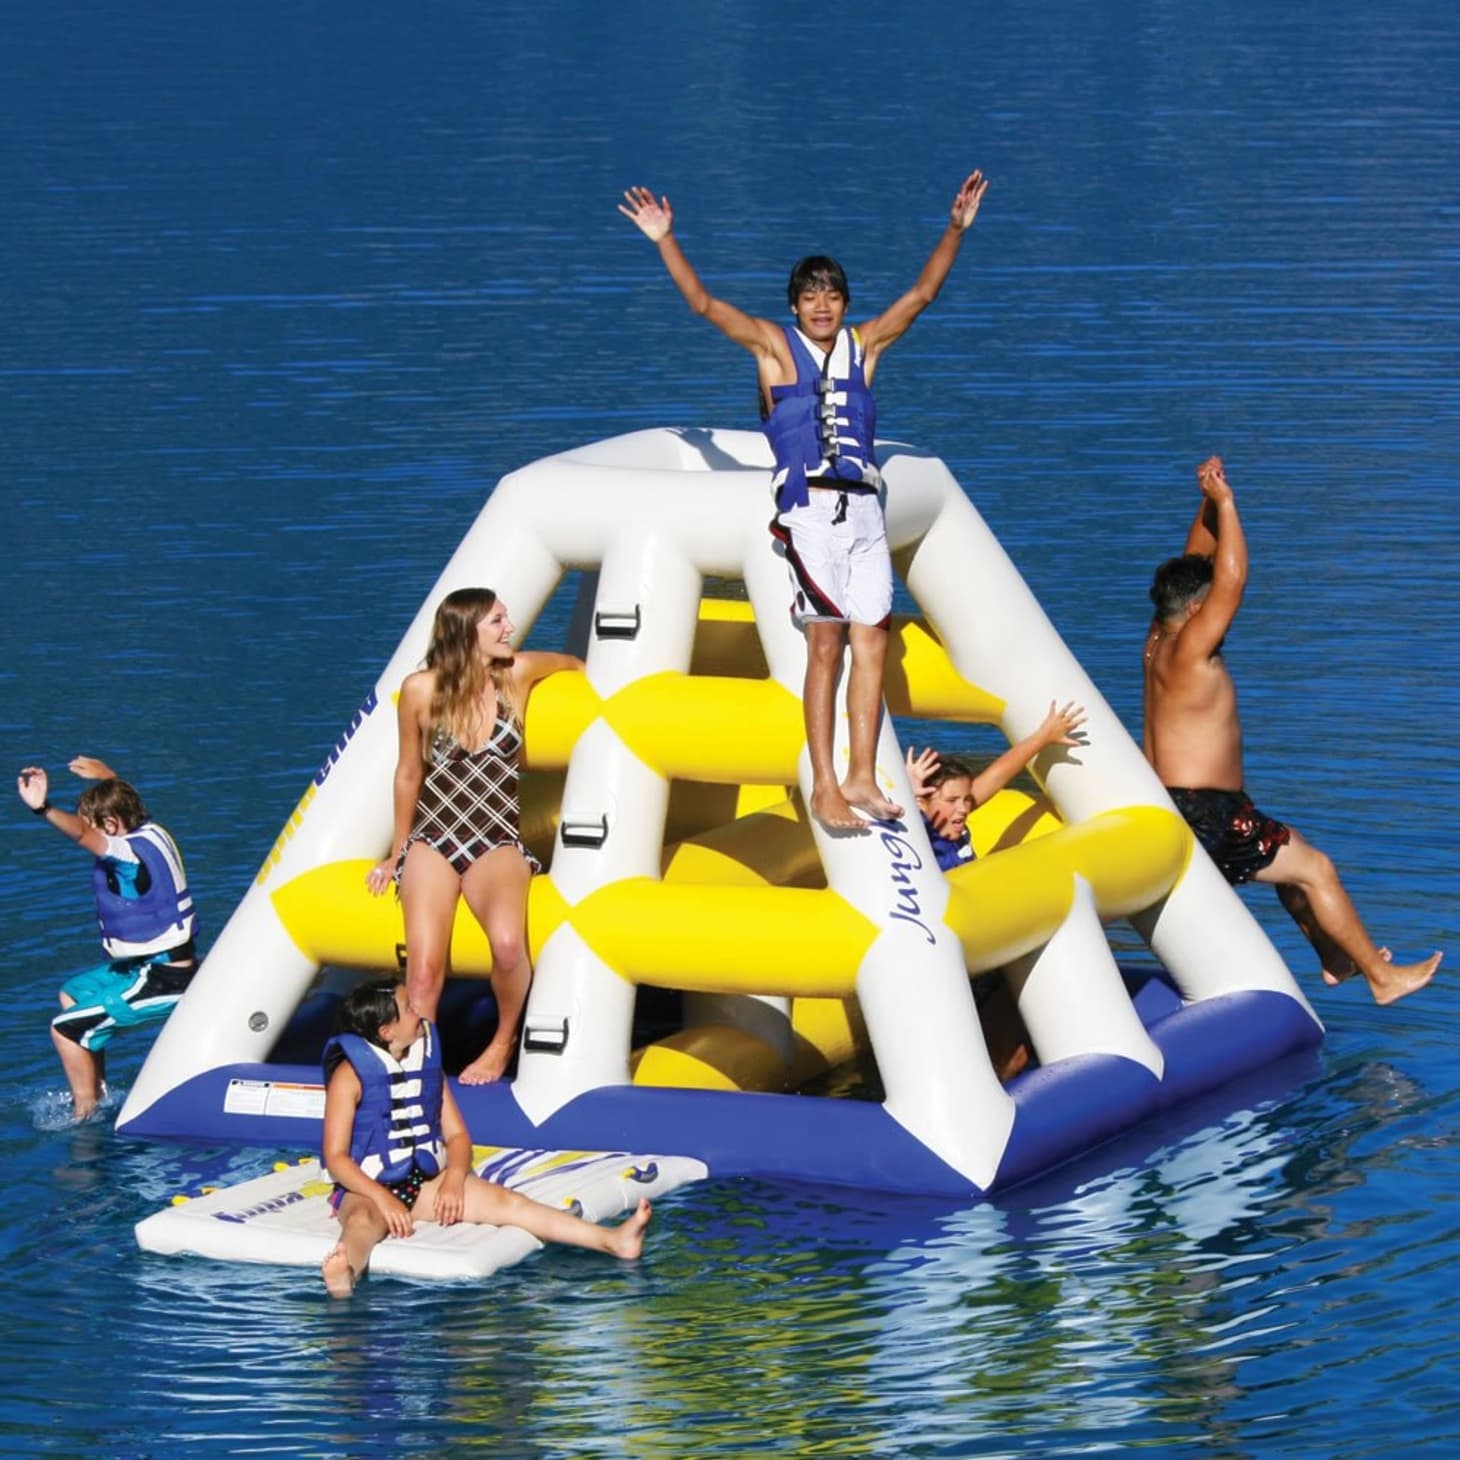 Blow up trampoline for water